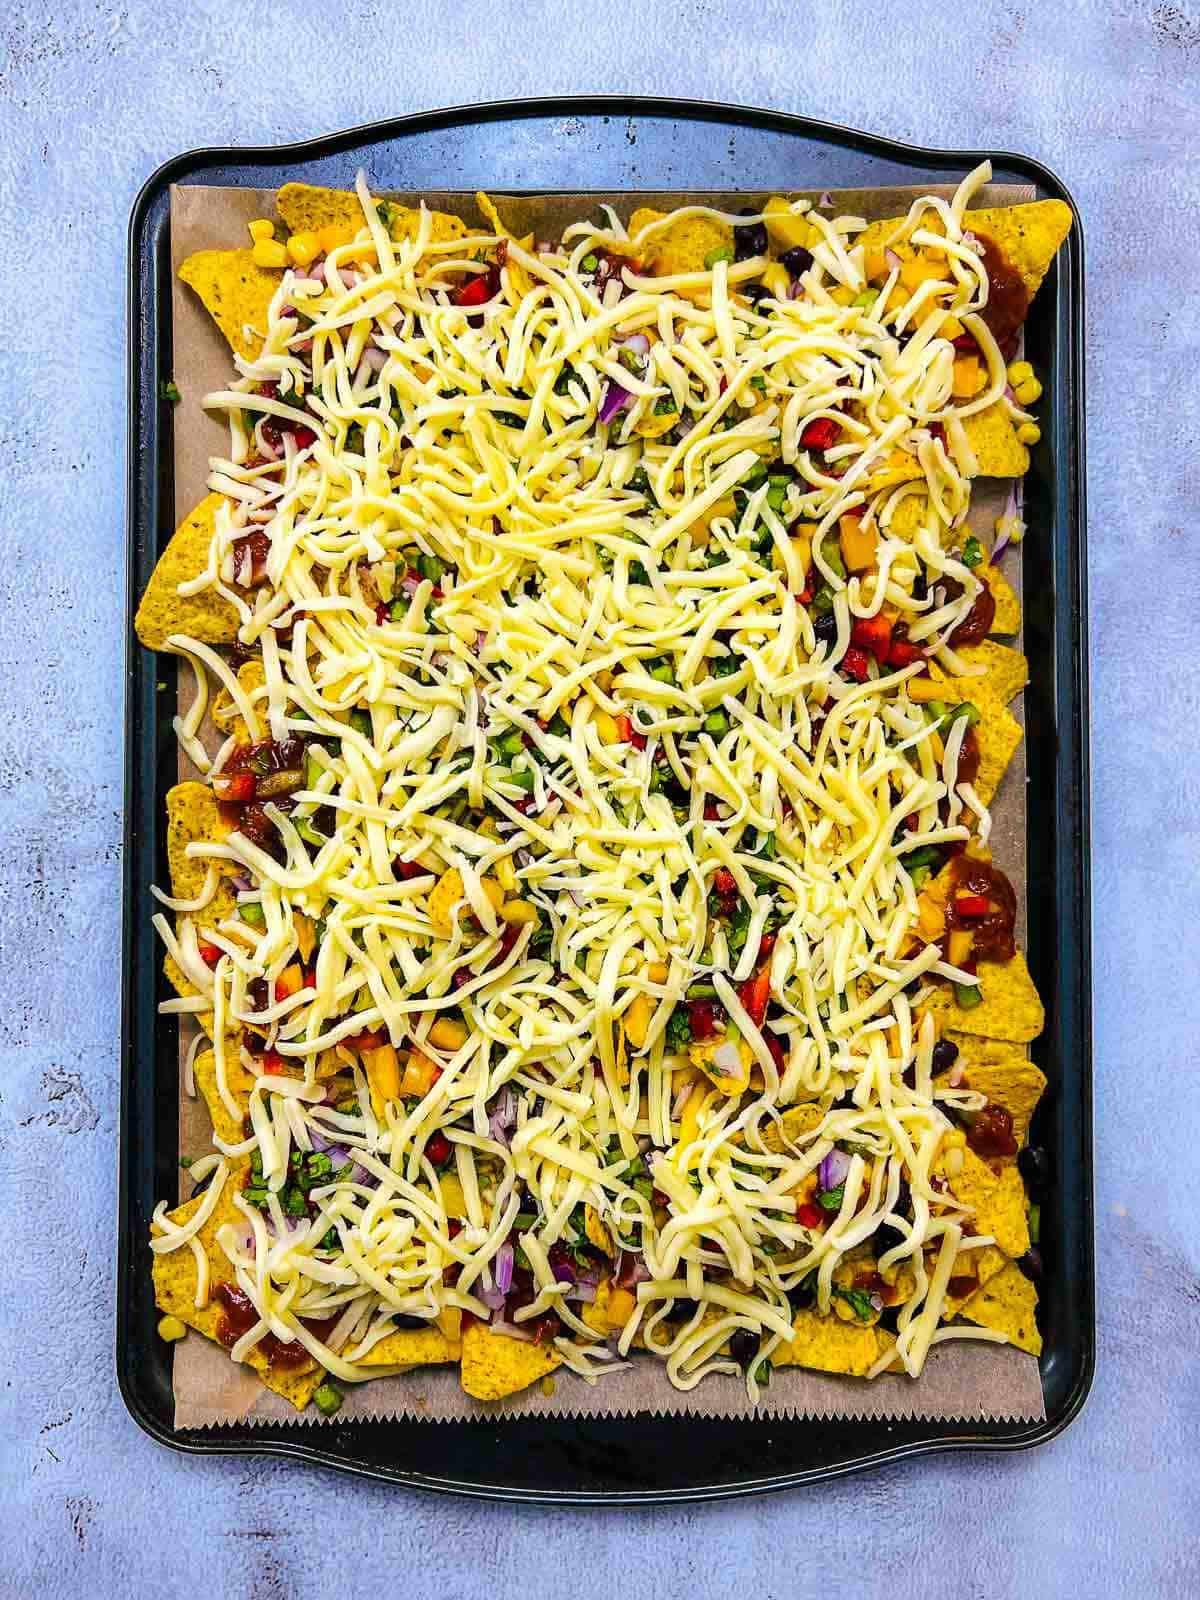 Nachos topped with shredded cheese before putting into the oven.